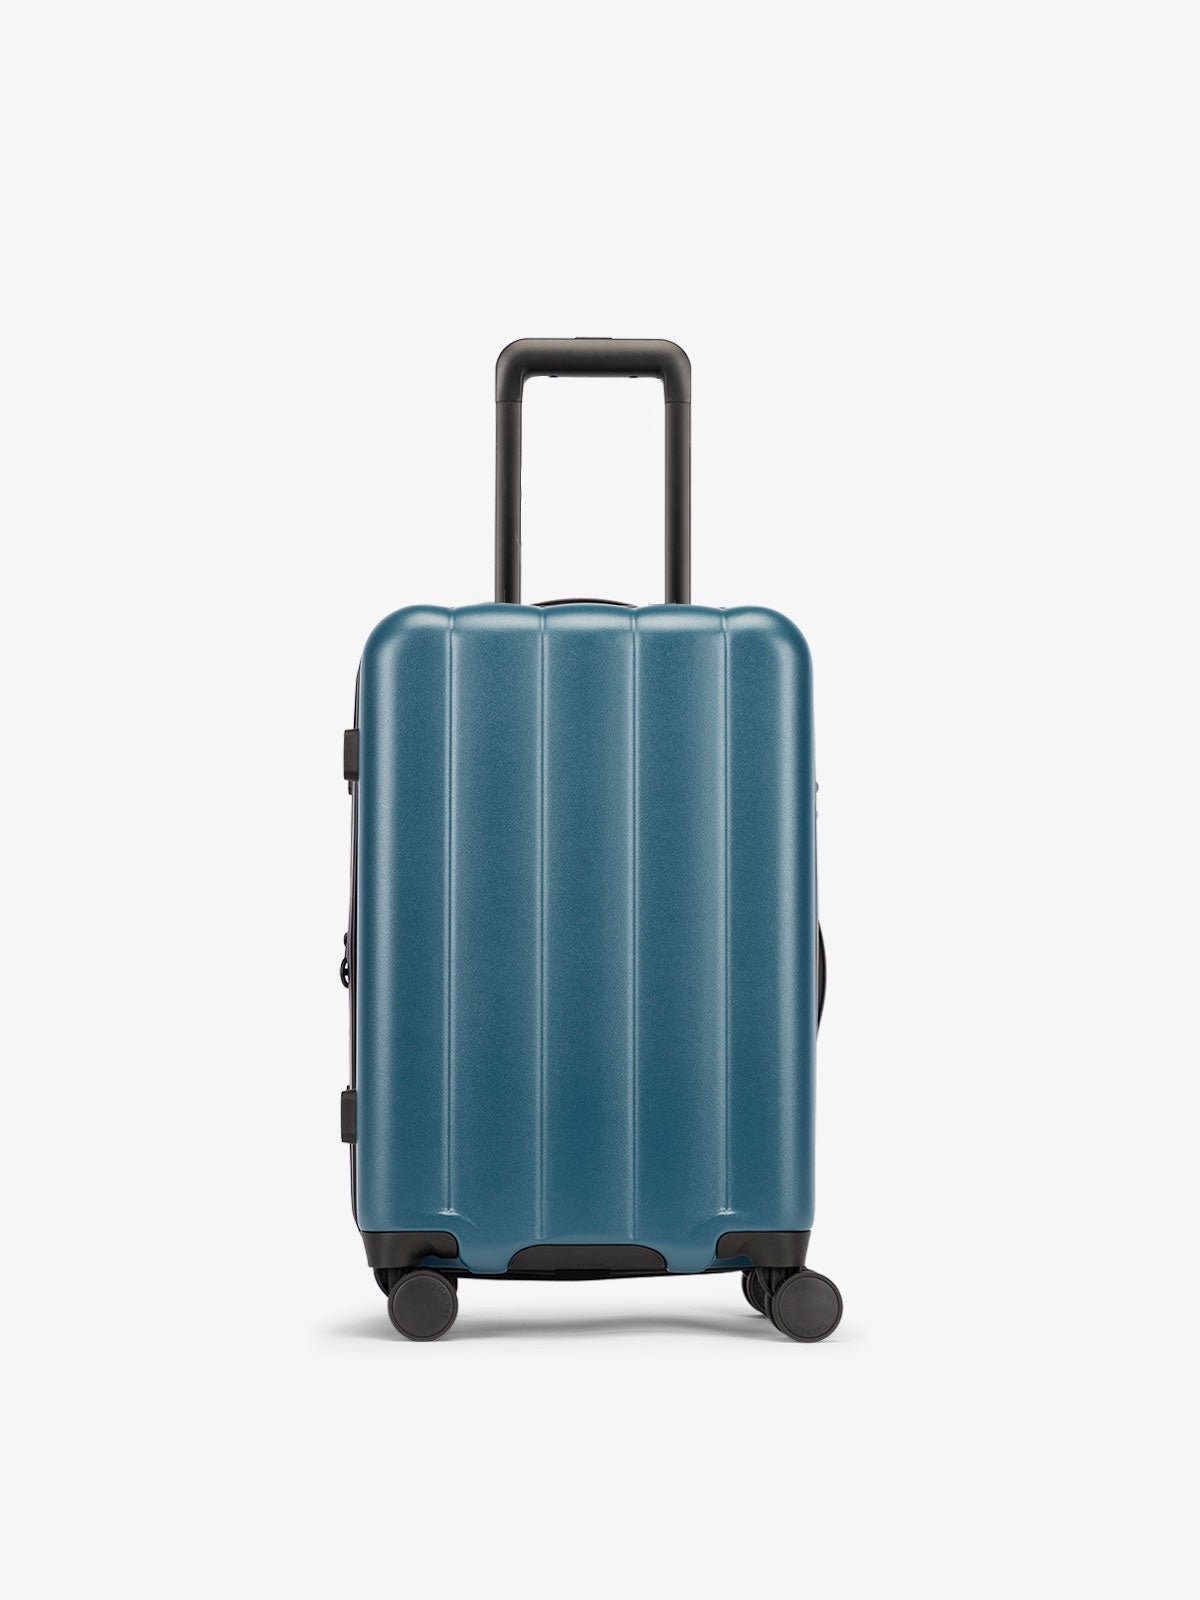 Pacific blue carry-on luggage made from an ultra-durable polycarbonate shell and expandable by up to 2"